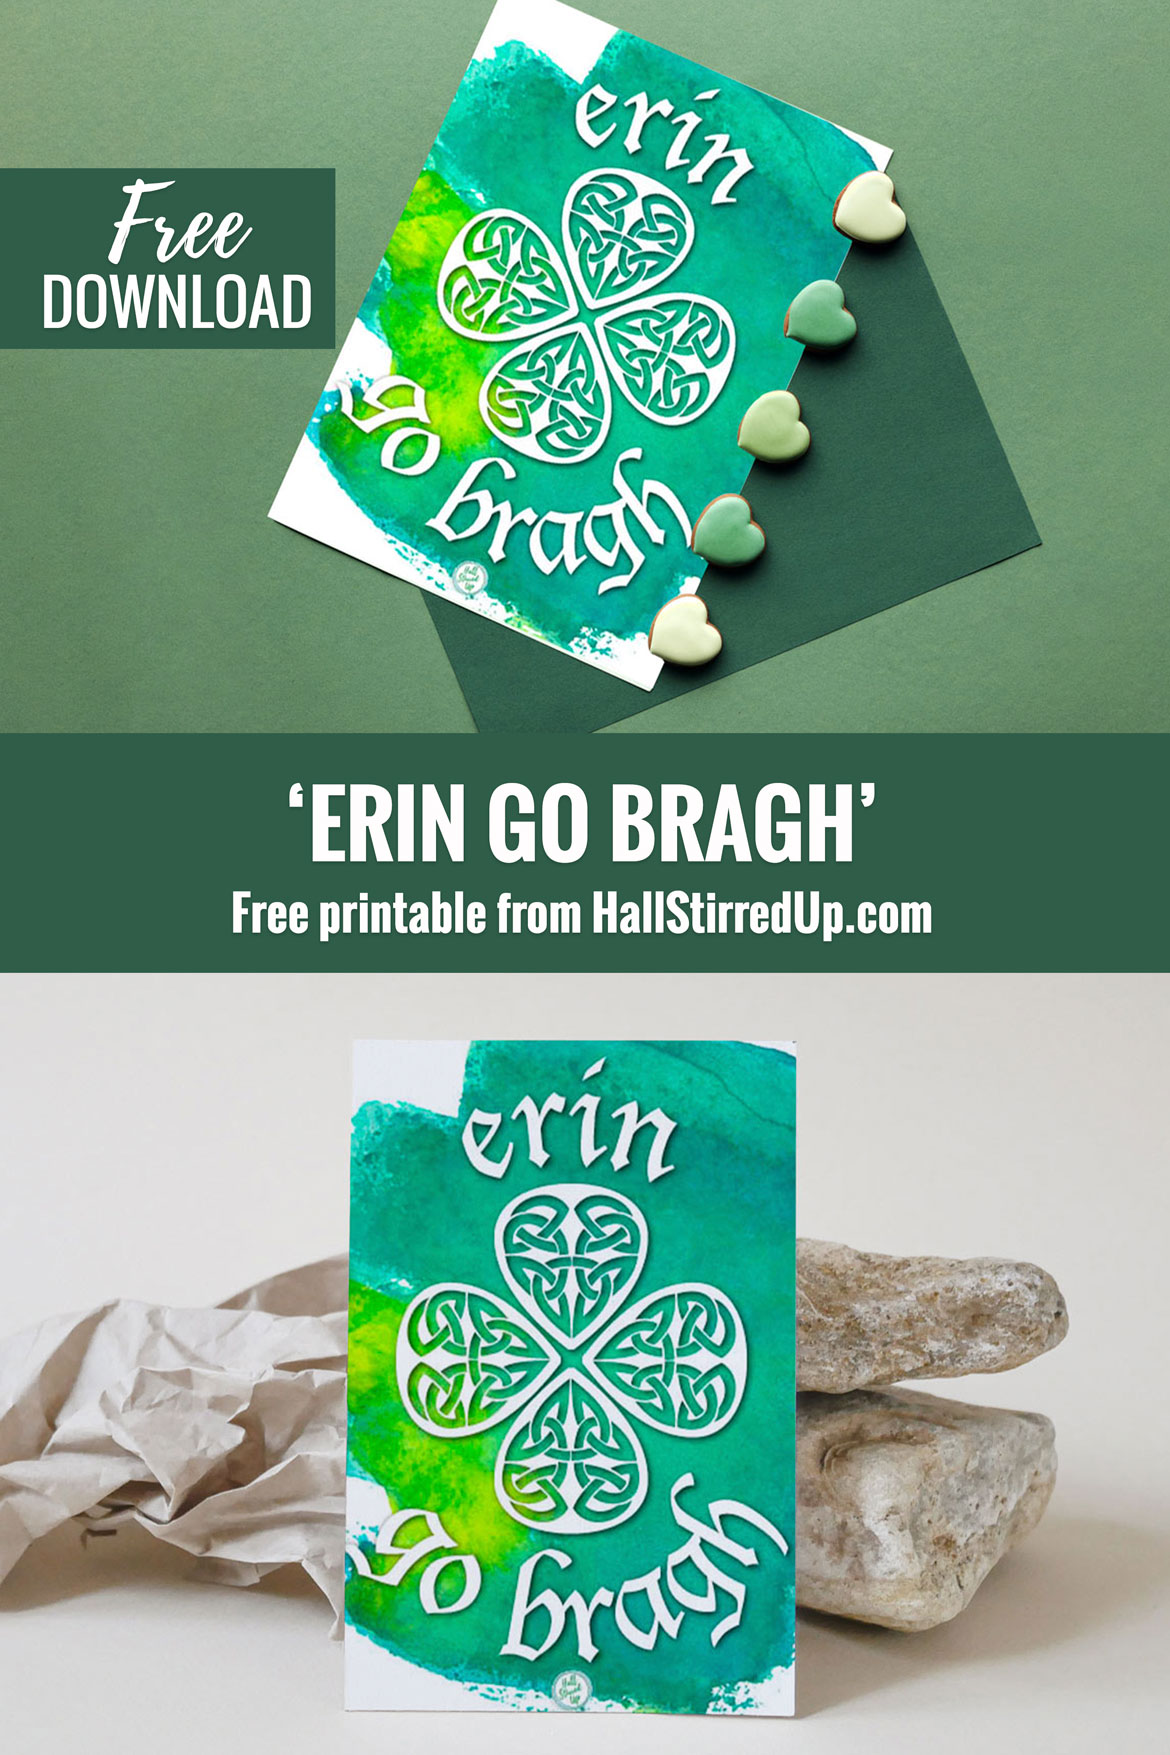 Happy St. Patrick's Day with a fun, free printable